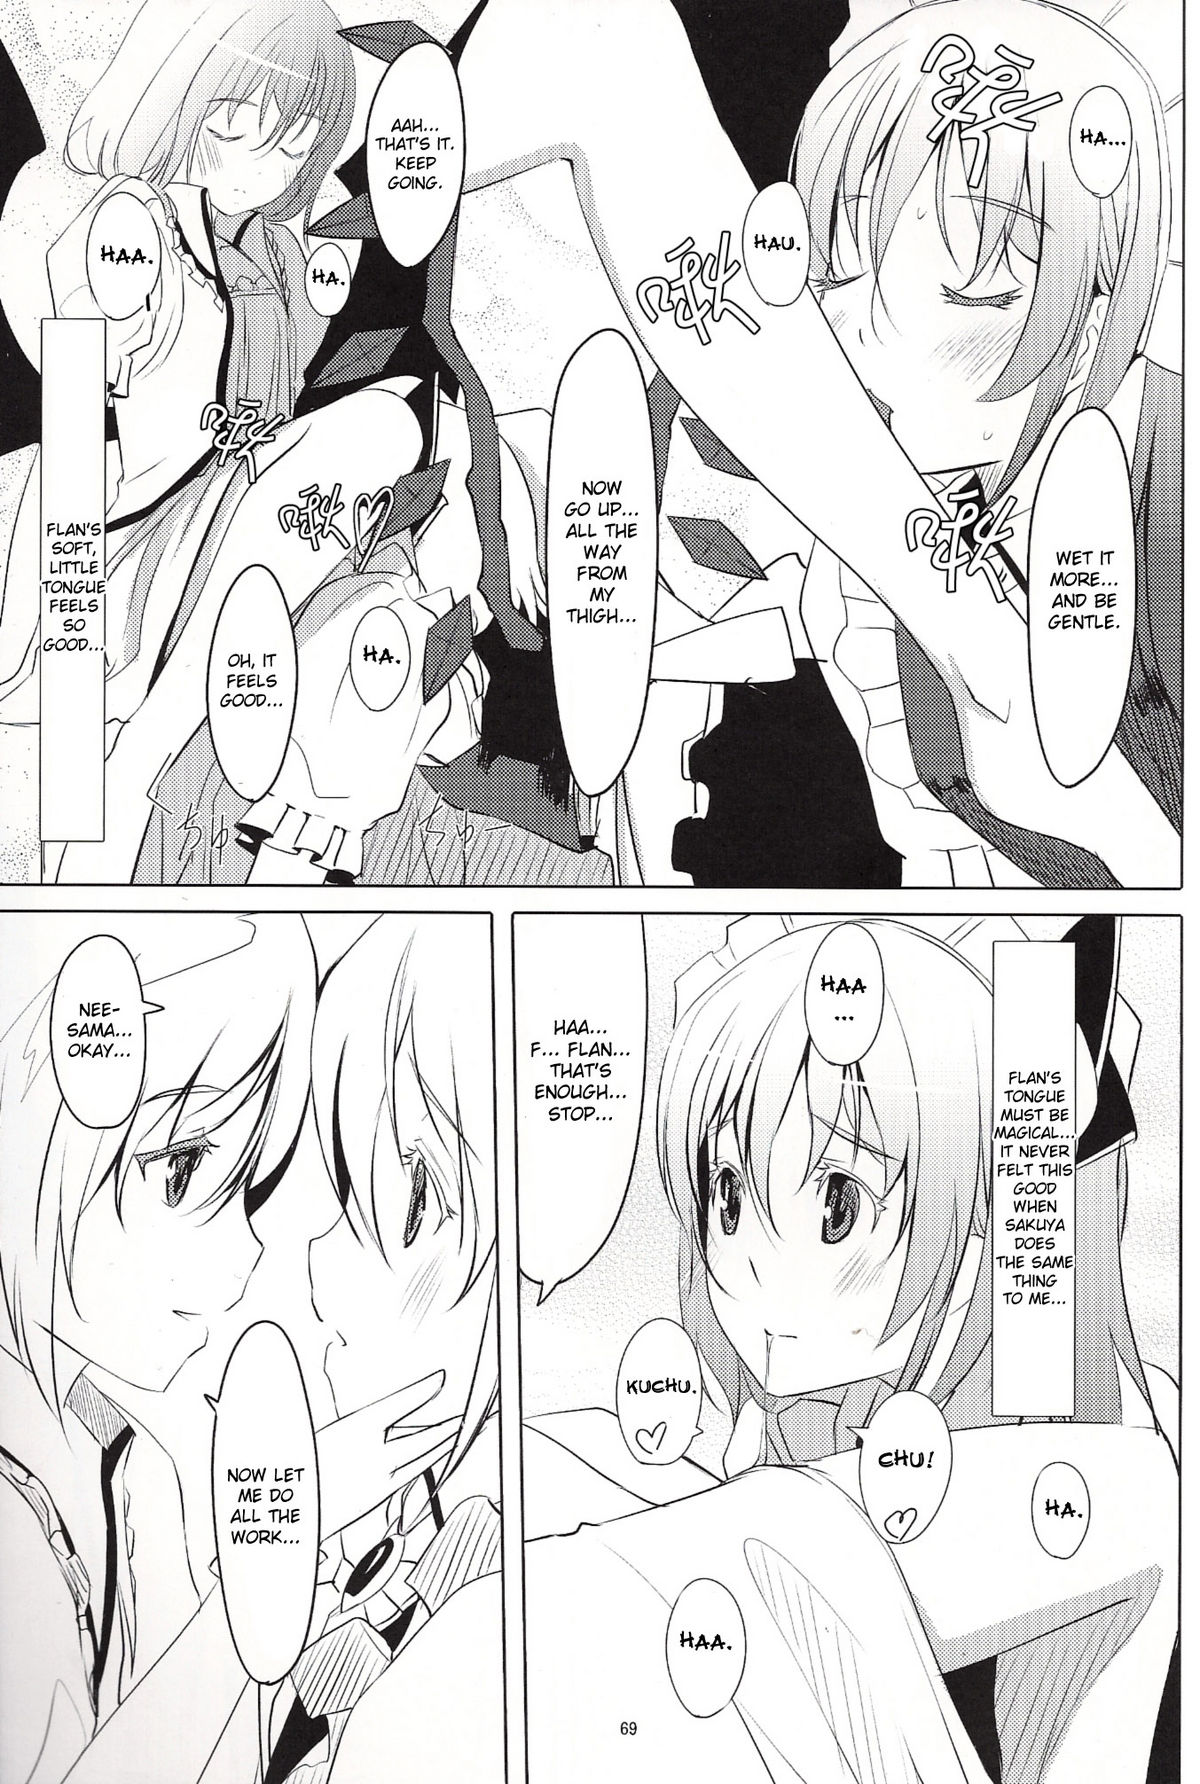 [telomereNA (Gustav)] S-2:Scarlet Sisters (Touhou Project) [English] [desudesu] [Incomplete] page 8 full